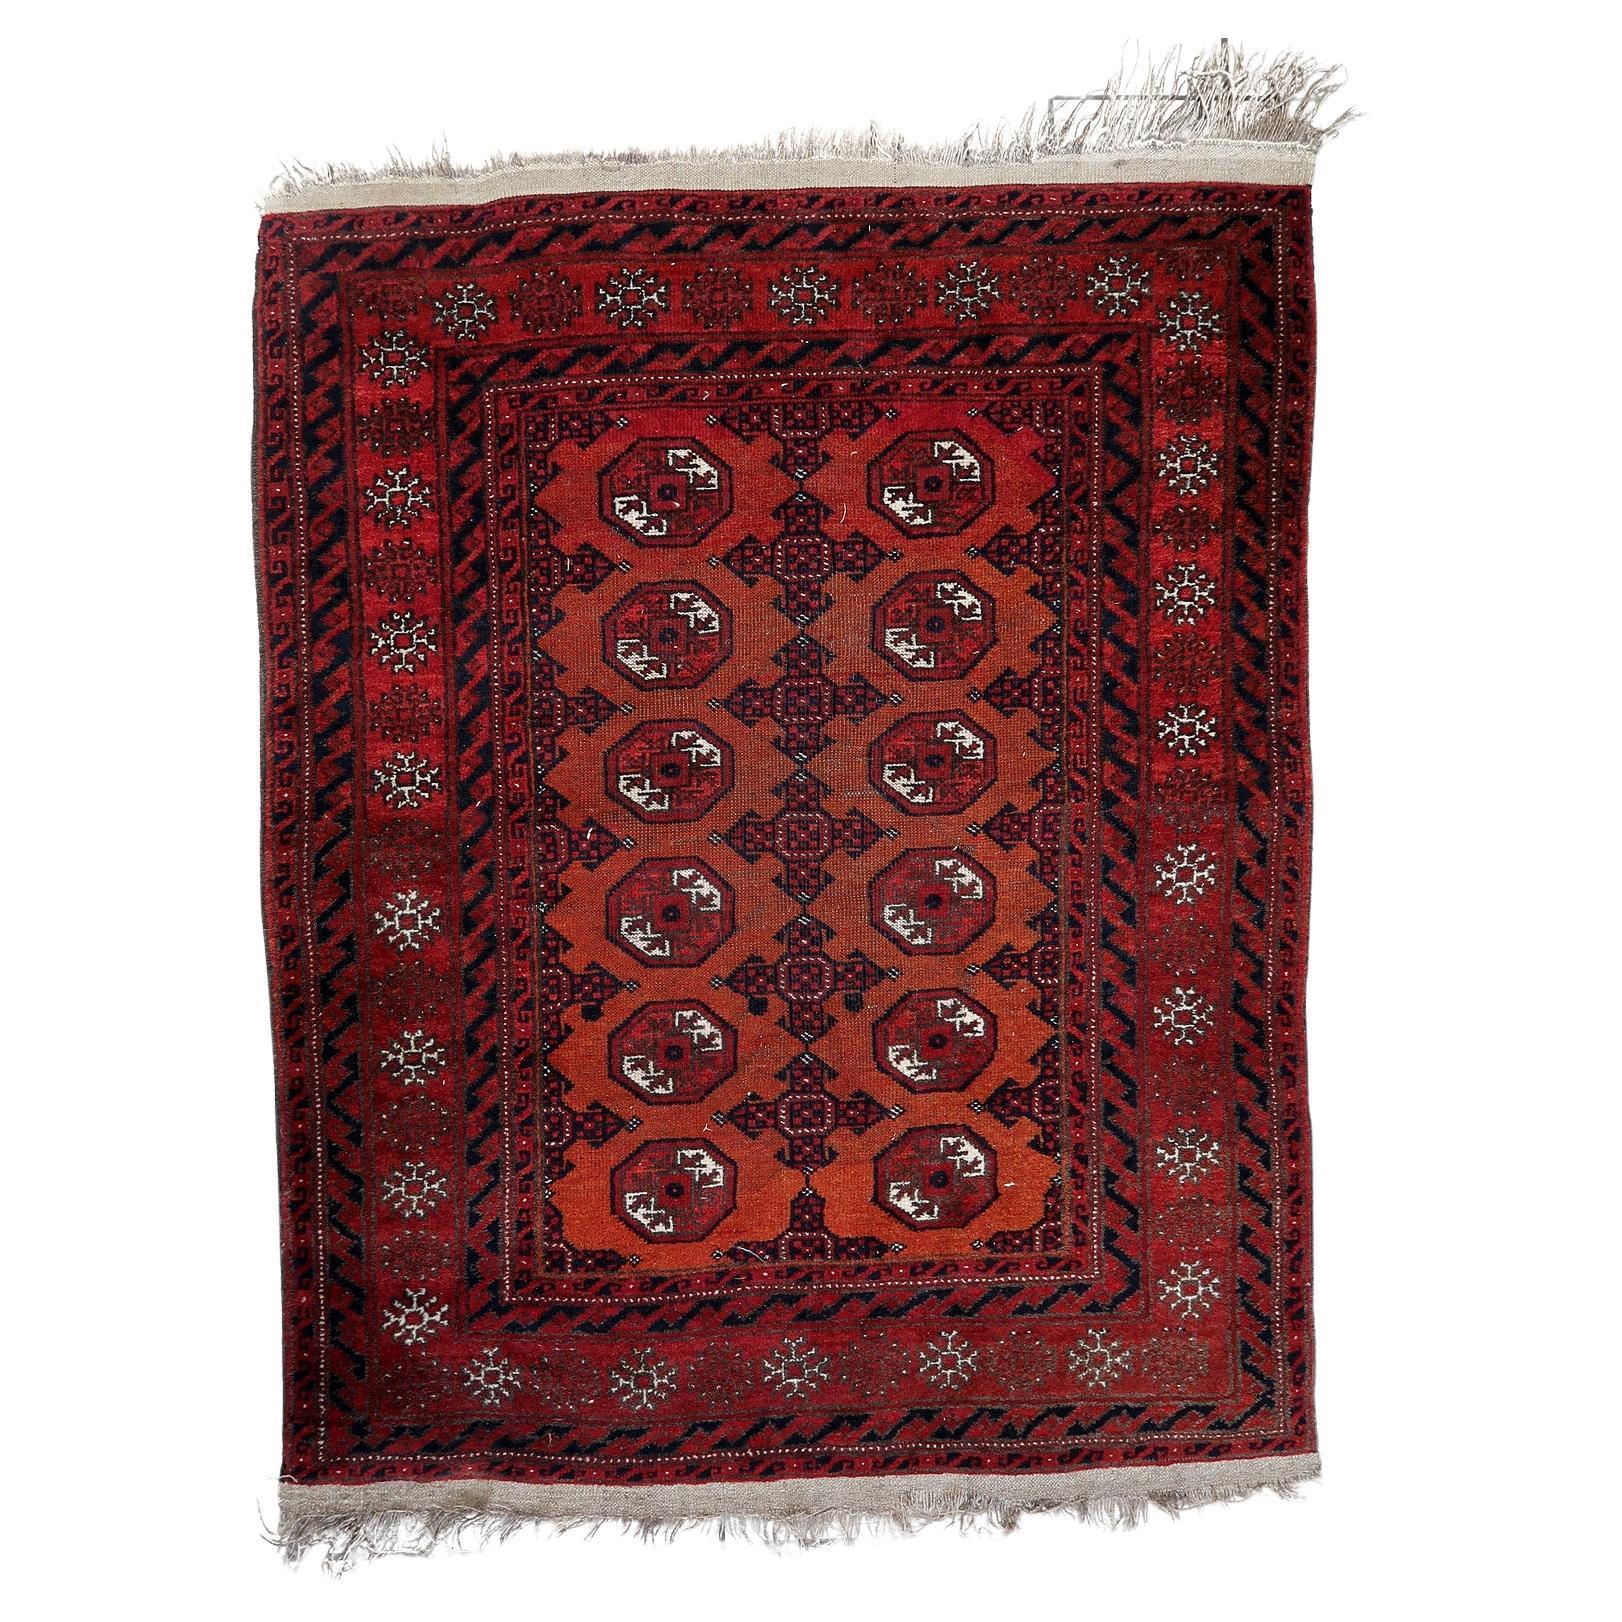 Handmade Antique Afghan Baluch Rug 3.8' x 4.8', 1920s - 1C1141 For Sale